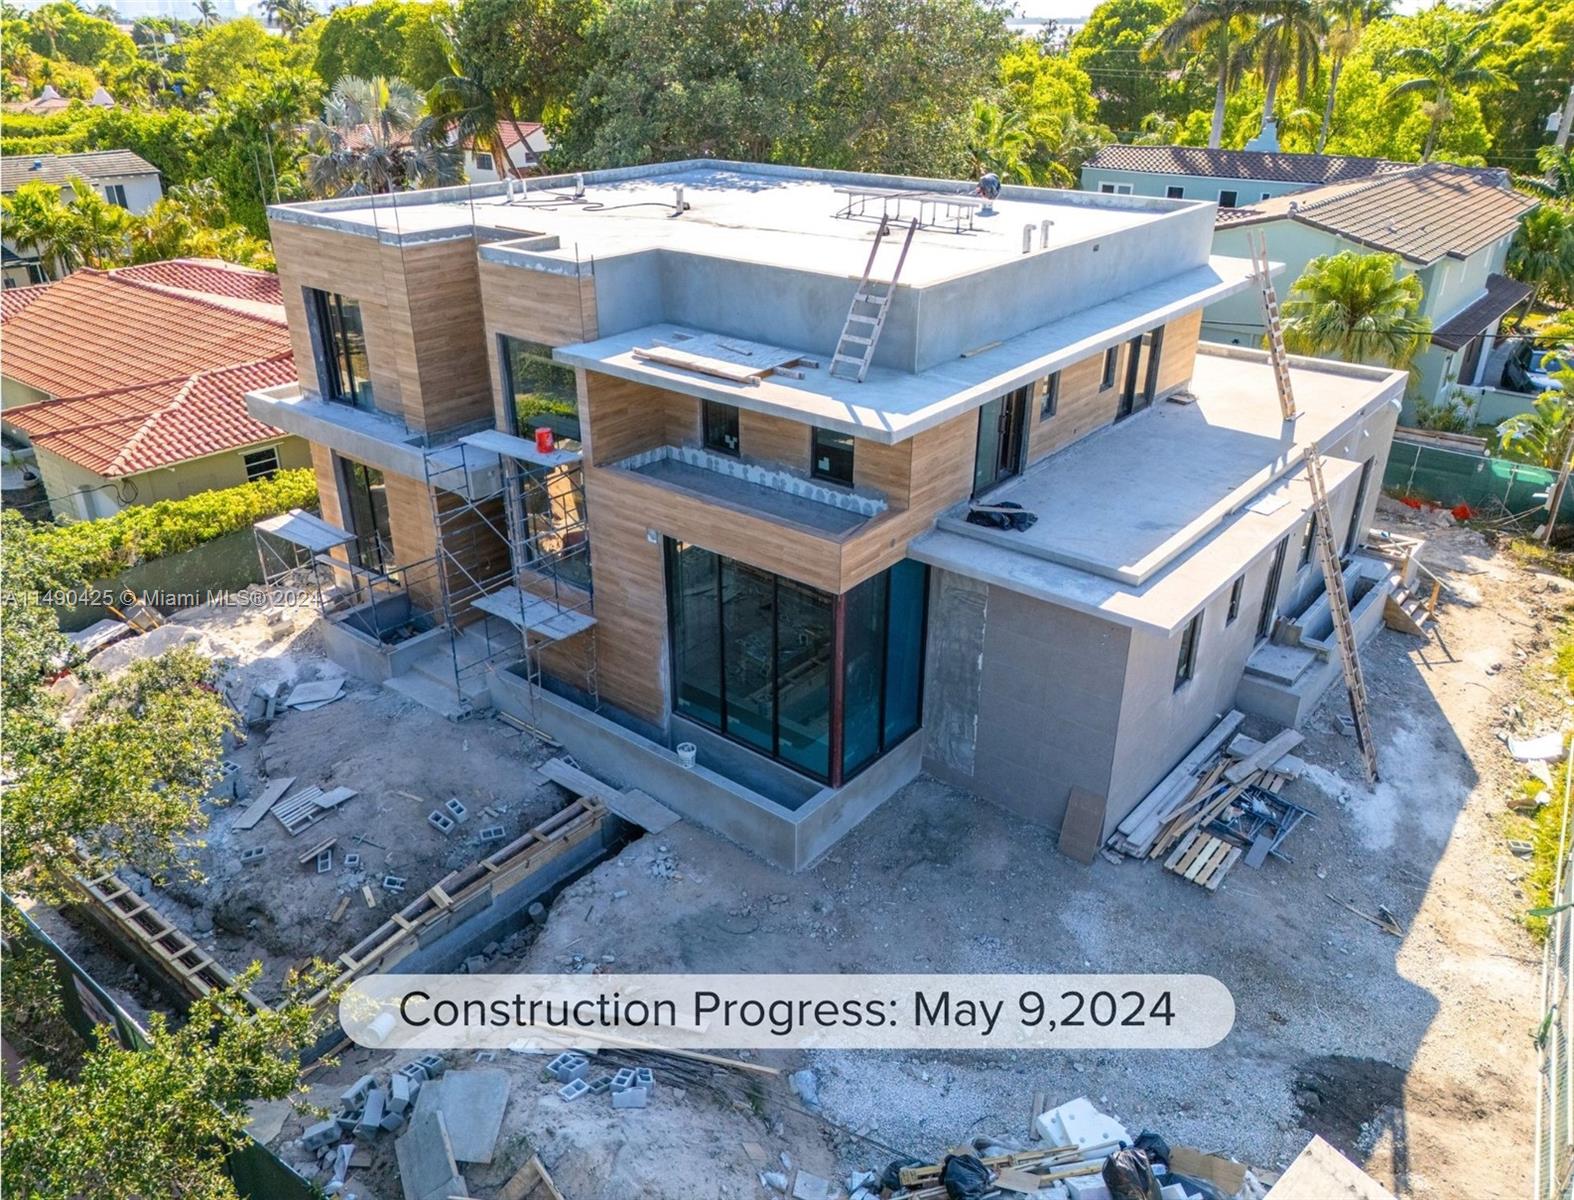 Expected Delivery Summer 2024. Brand-new construction w/ 6 bed, 7 baths, 4,501 interior SqFt and 1,428 SqFt of terraces and balconies. 4430 Nautilus Dr is an icon of tropical modern design. Along with open spaces, Italian cabinetry, and expansive covered patio, the residence features a pristine pool and open balcony, allowing owners and guests to experience the best of the South Florida Lifestyle. Designed to host family and friends, the great room doors open to seamlessly connect the indoor and outdoor spaces. This residence encompasses the most desirable combination of modern design and exceptional comfort. Centrally located minutes from world-class retail, beaches, private golf courses & beach clubs such as LaGorce Country Club, Indian Creek Country Club, Faena & the Bath Club.